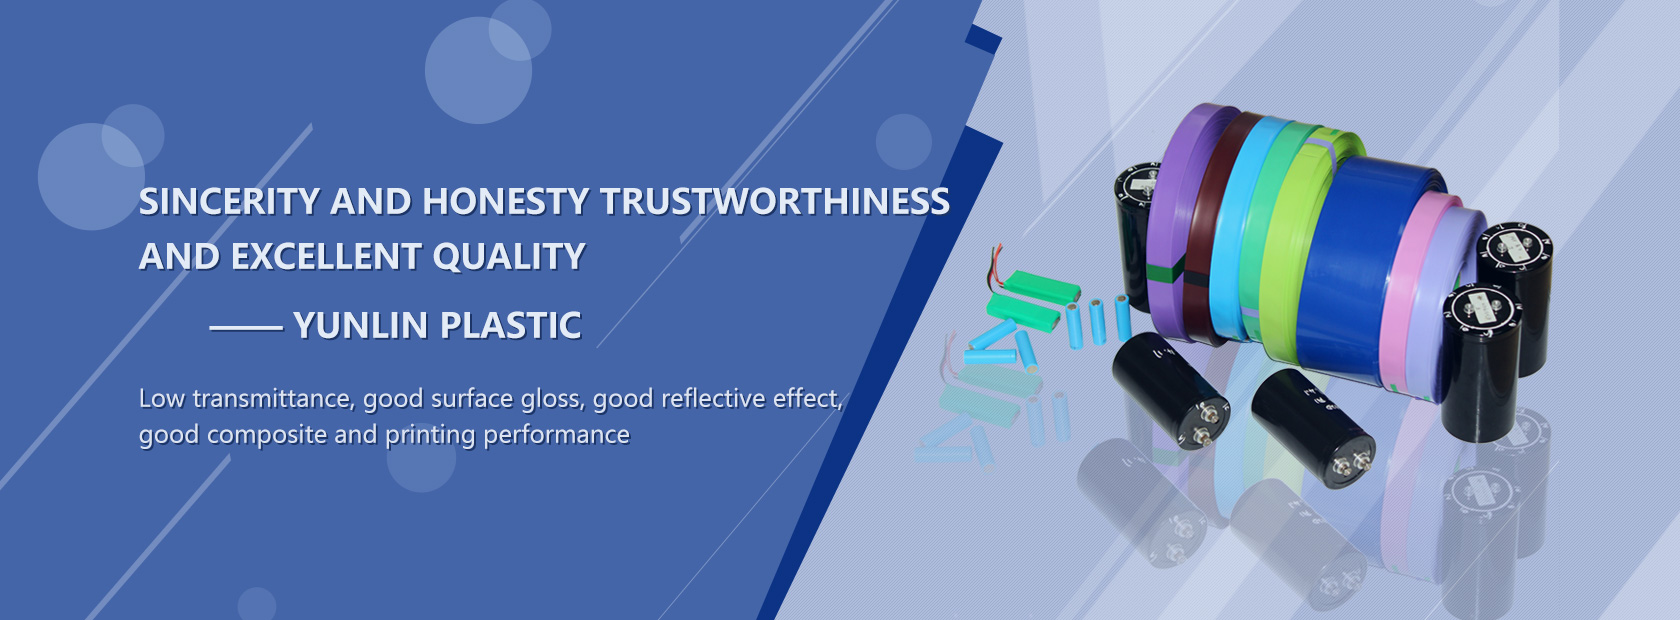 sincerity and honesty, trustworthiness and excellent quality - Yunlin plastic